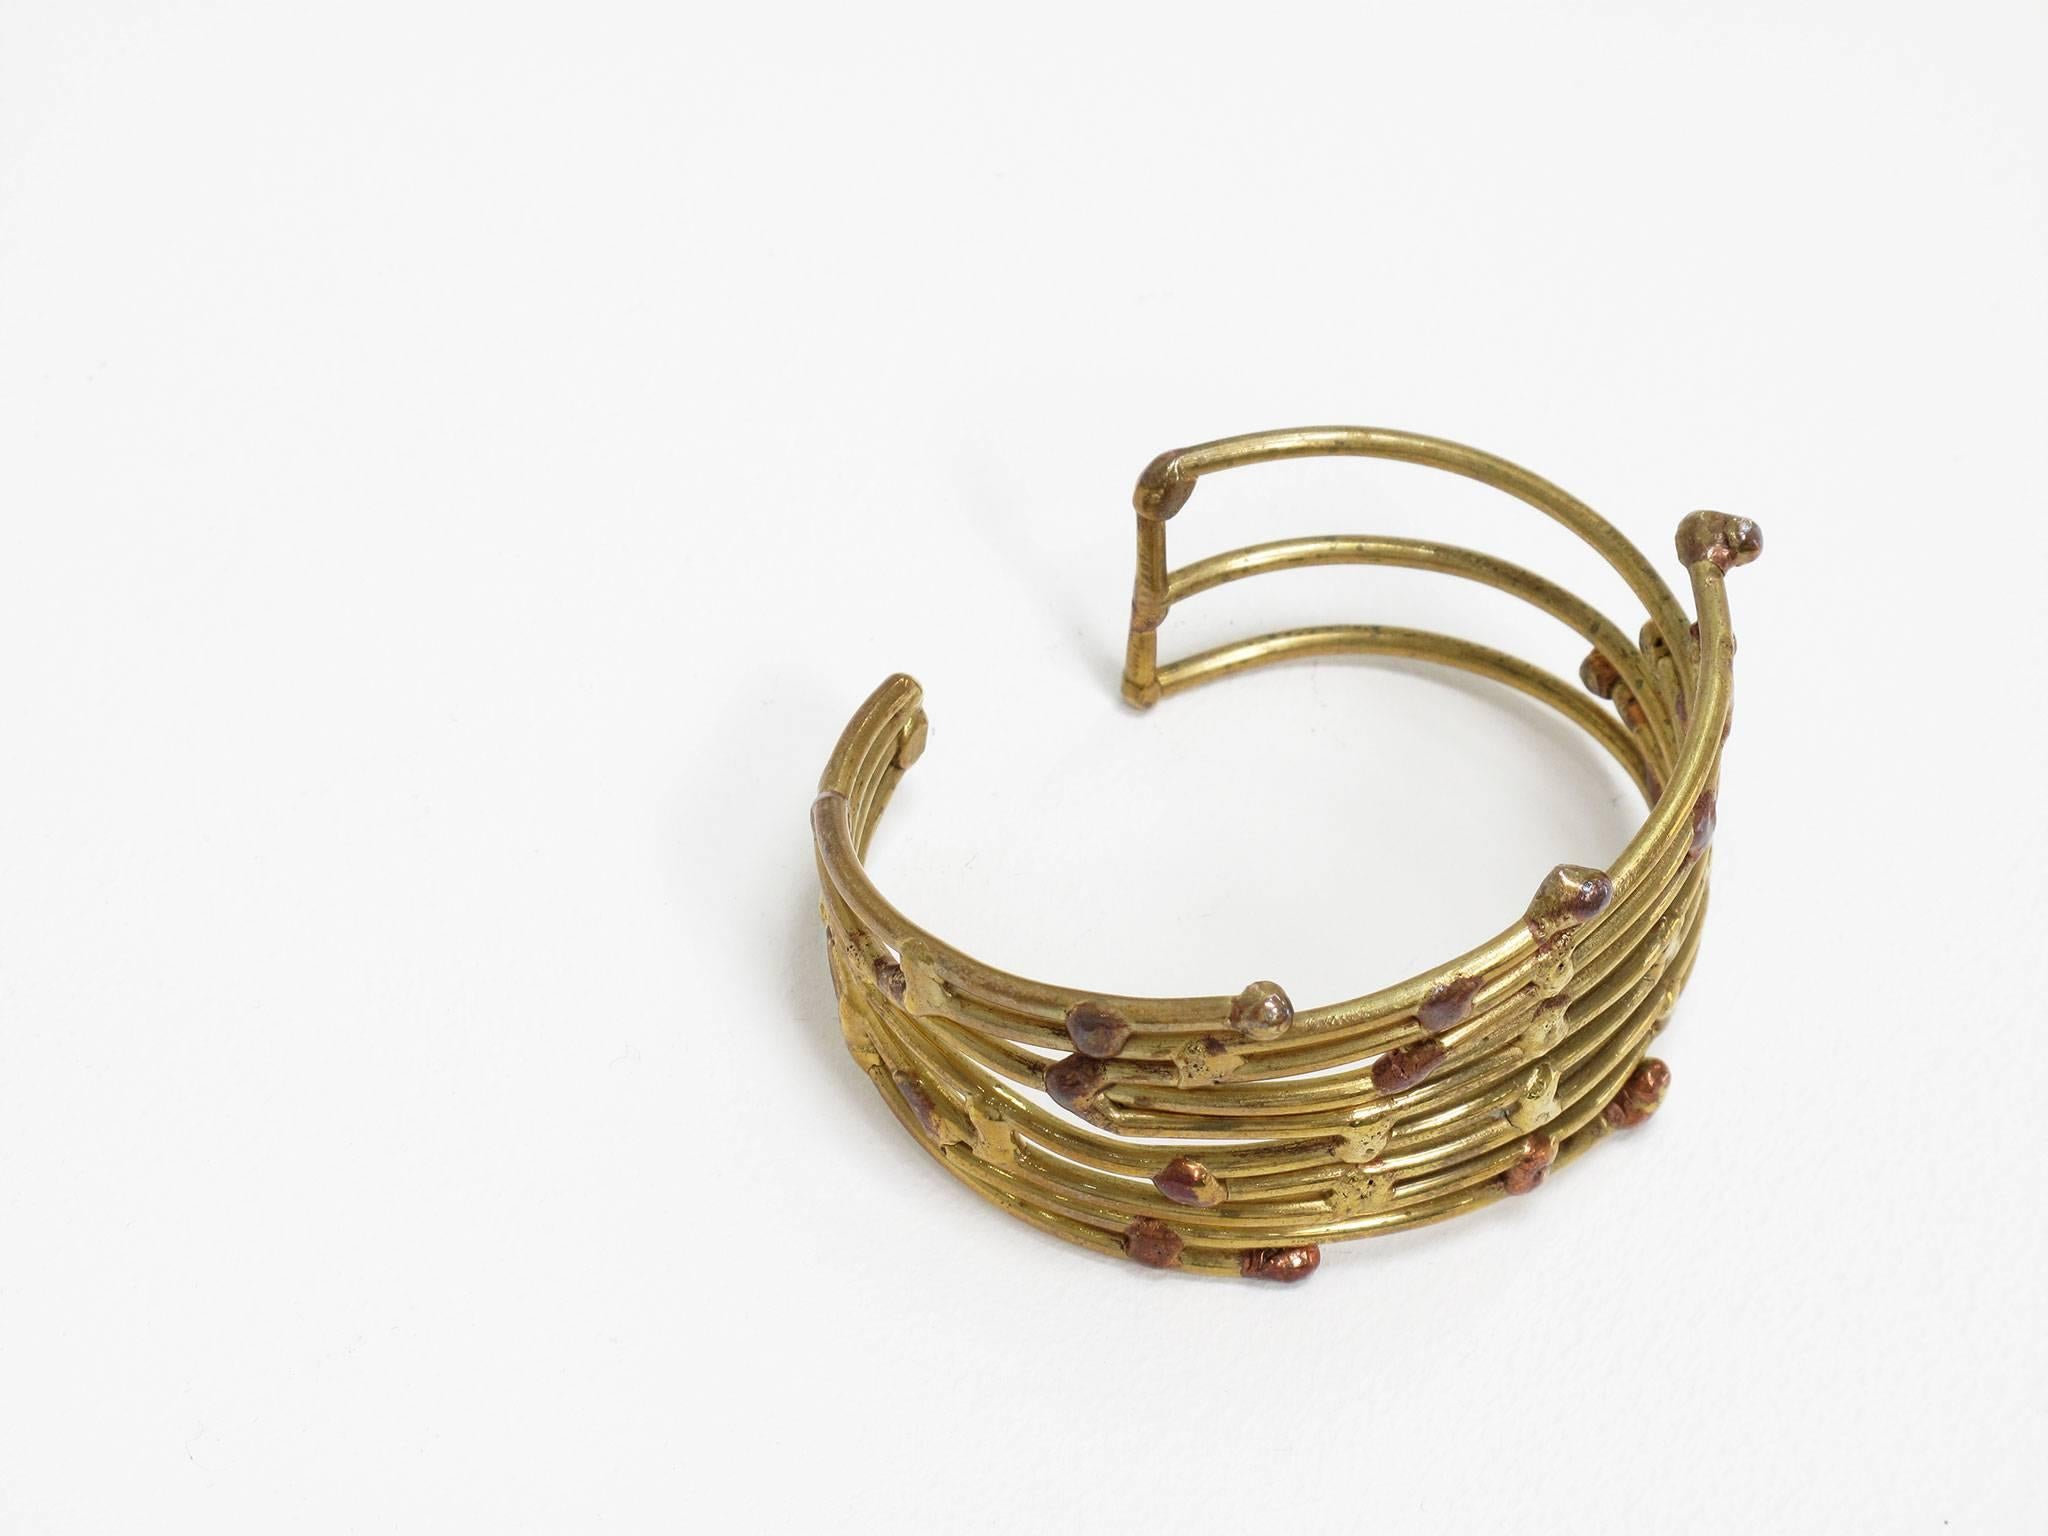 Hand-Crafted Handmade Vintage Copper and Brass Cuff Bracelet For Sale